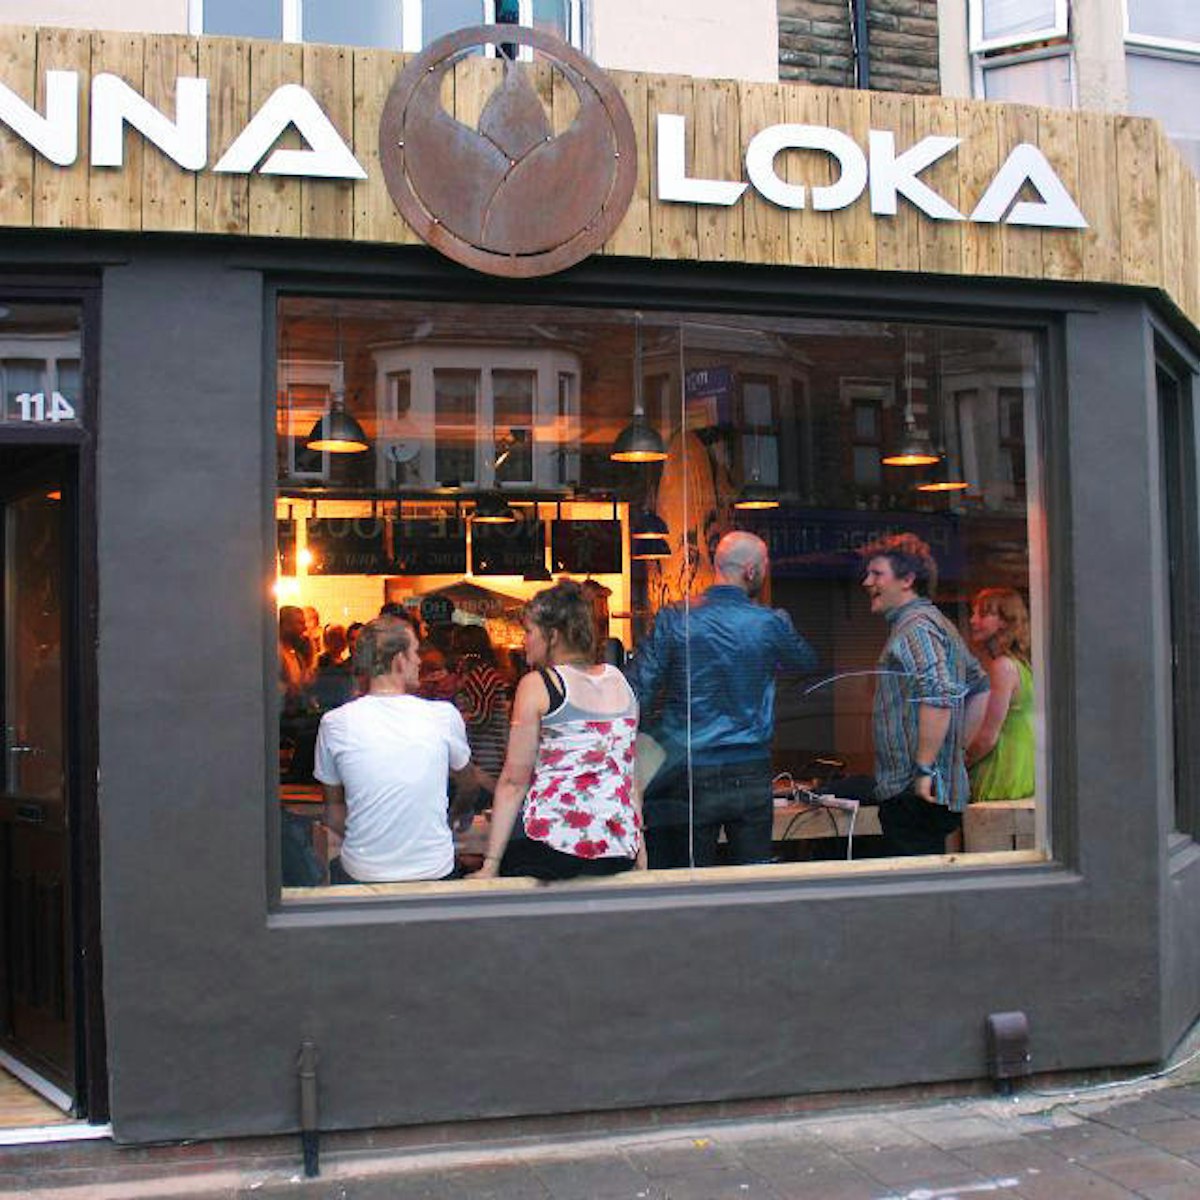 The view of Anna-Loka from the street